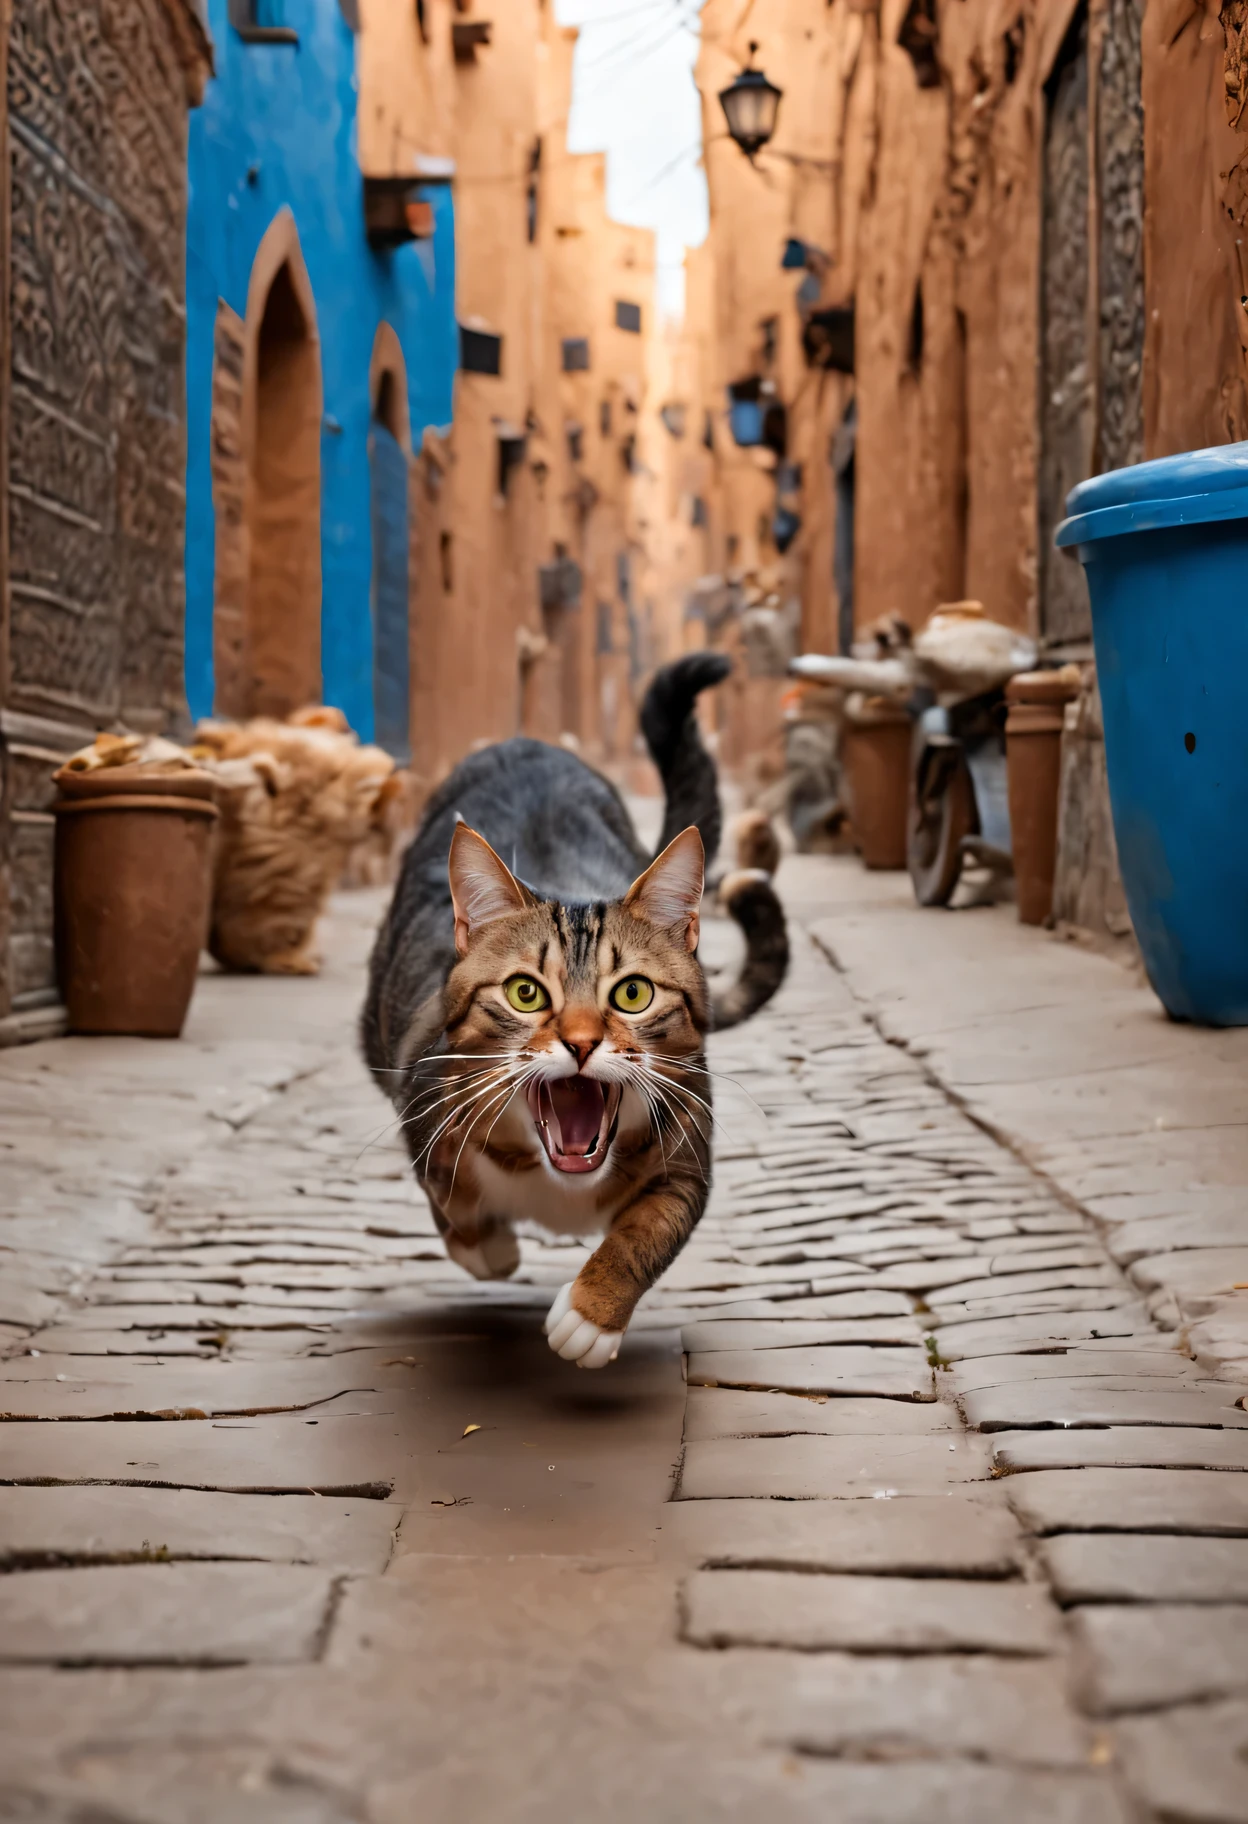 there is a кот that is running down the street with Moroccan people chasing it, awesome кот, чрезвычайно реалистичное фото, Реальные Том и Джерри, happy кот, кот attacking Marrakech, funny кот, running кот, !!! кот!!!, !!!! кот!!!!, Очень реалистичное фото, Реальная картина жизни, ультра реалистичная картинка, гиперреальное фото, украденная сардина во рту, гиперреалистичная картина